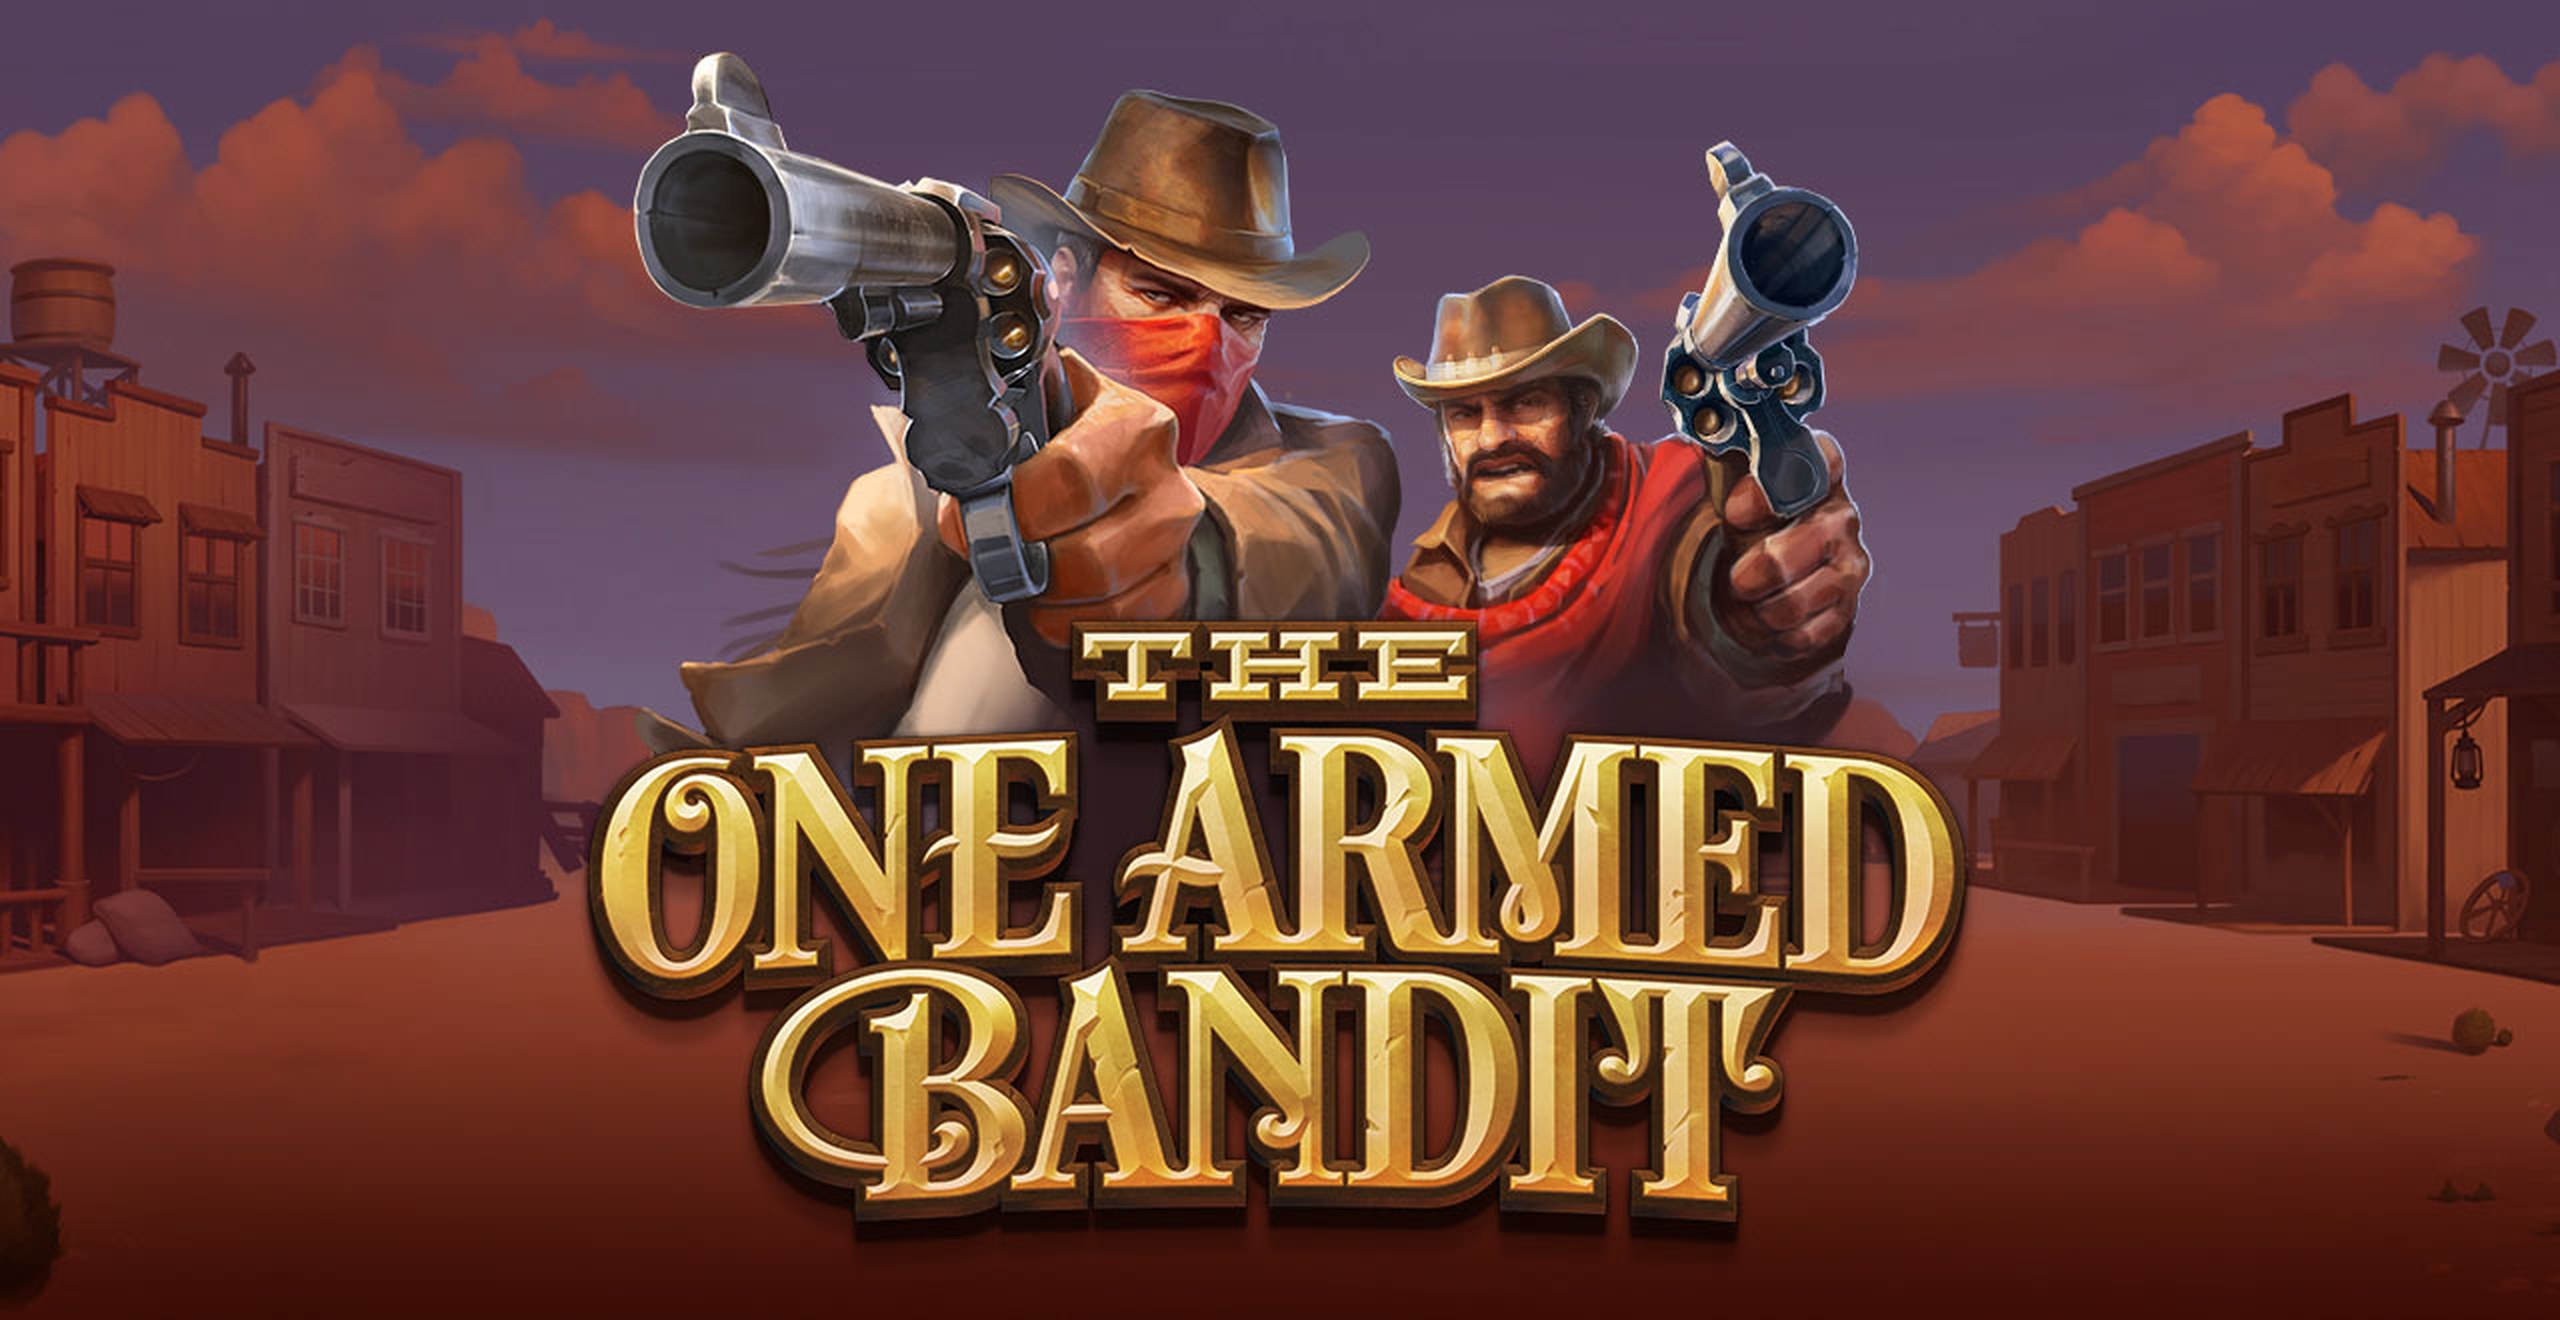 The One Armed Bandit demo